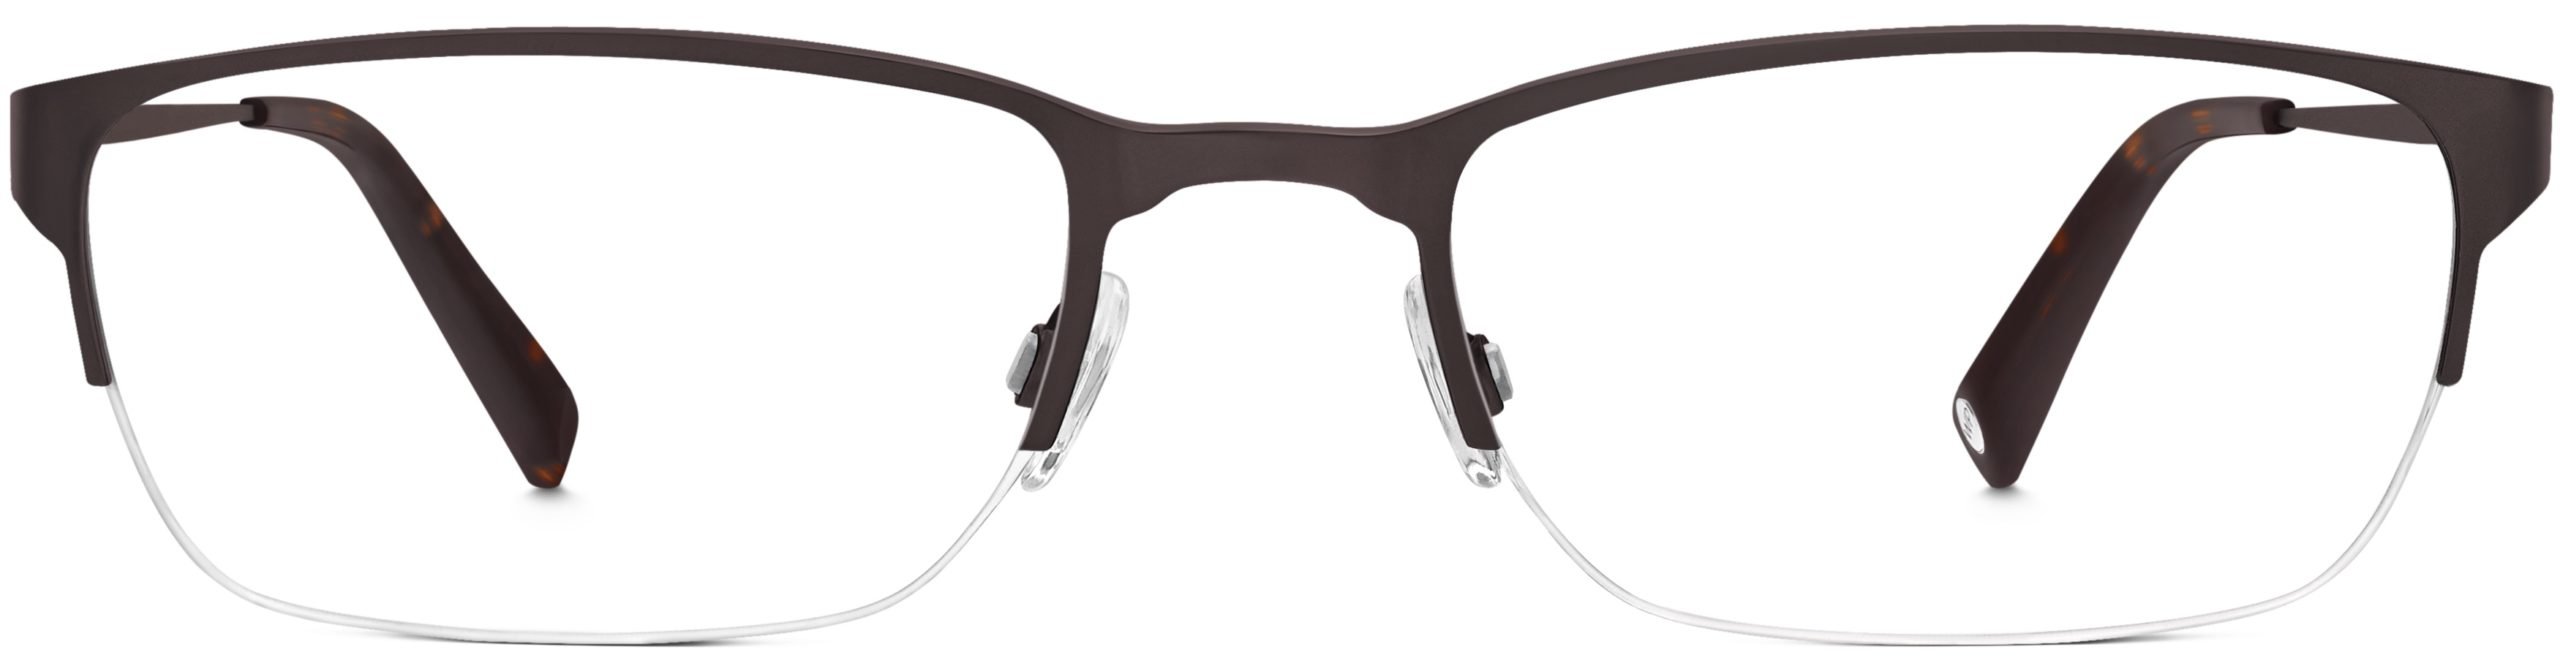 Caldwell glasses in carbon